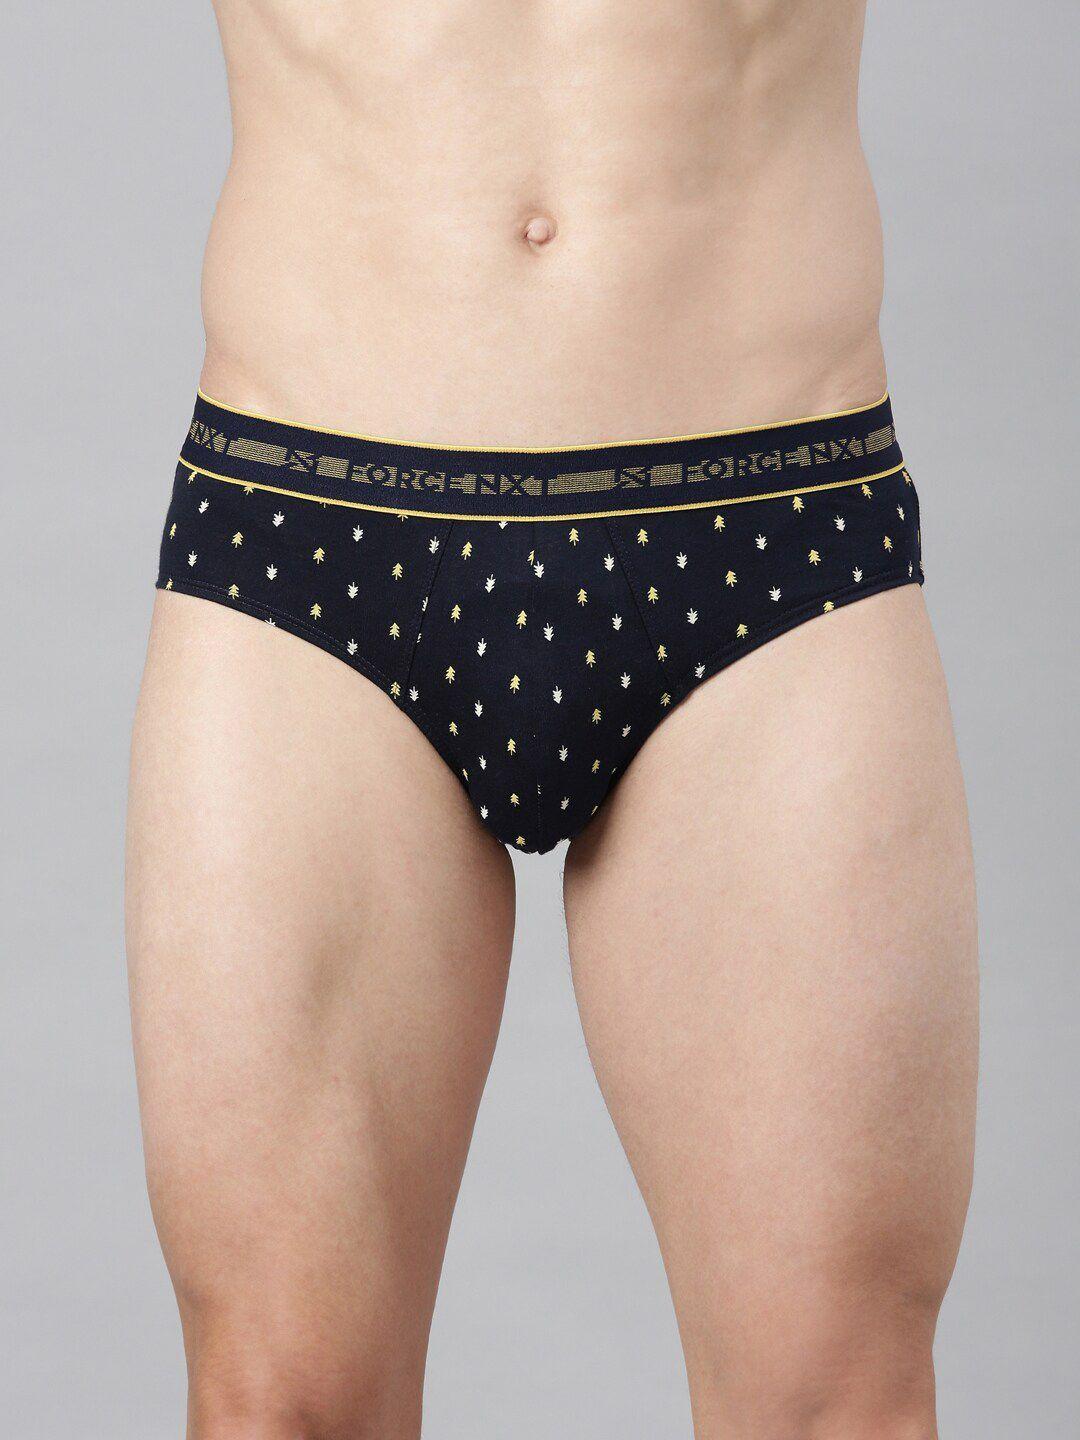 Force NXT Men Navy Blue & White Printed Pure Combed Cotton Basic Briefs